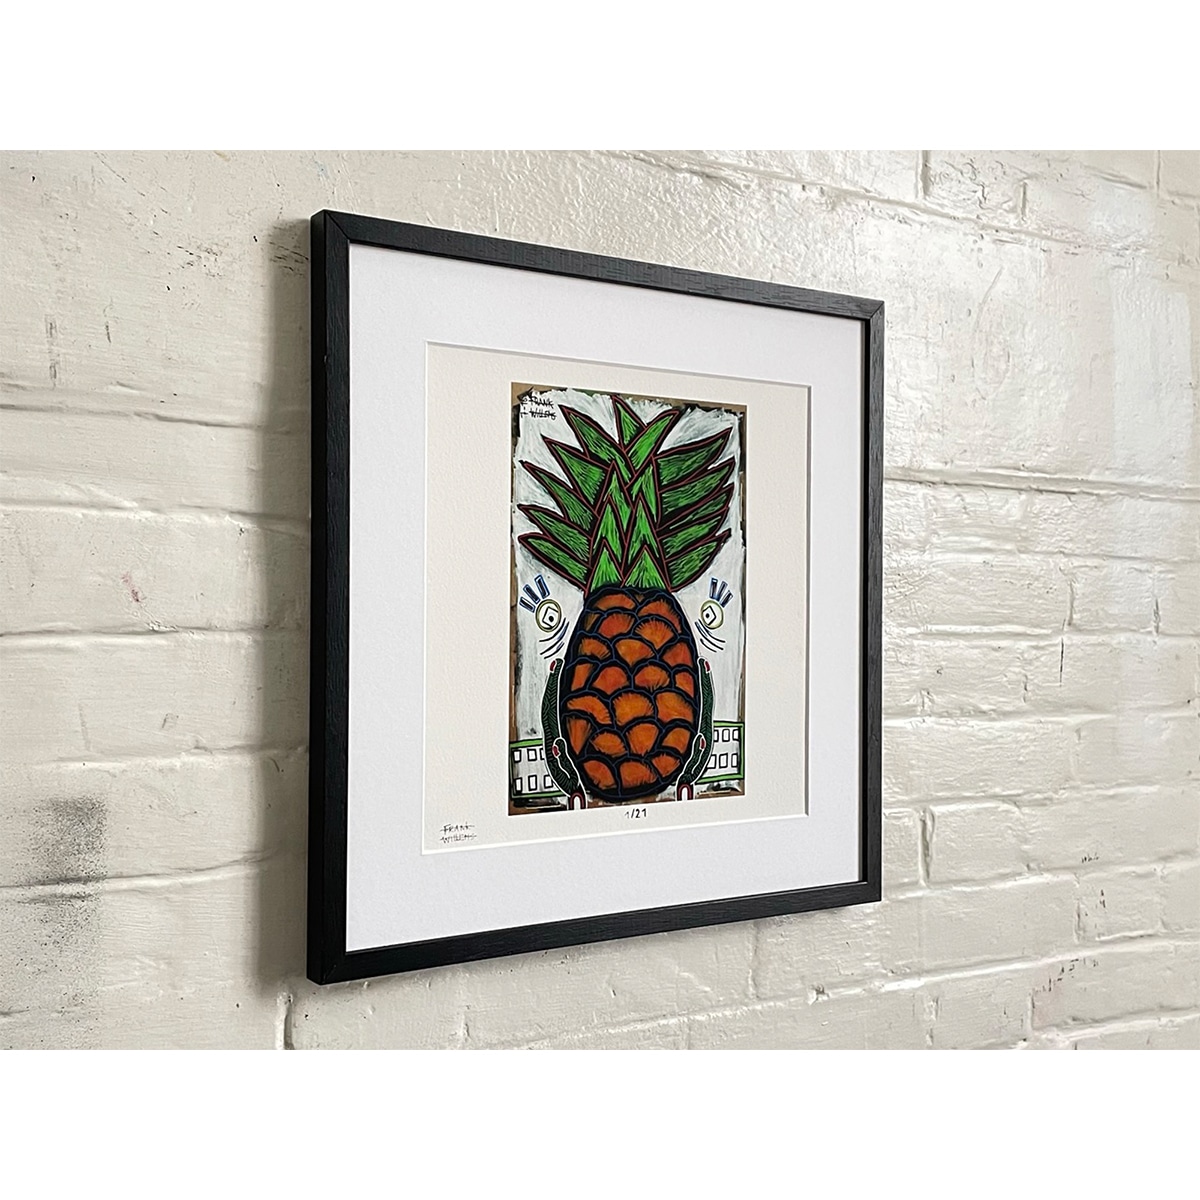 Limited Edt Art Prints -_0000__0000_YUMMY PINEAPPLE 01 - Frank Willems